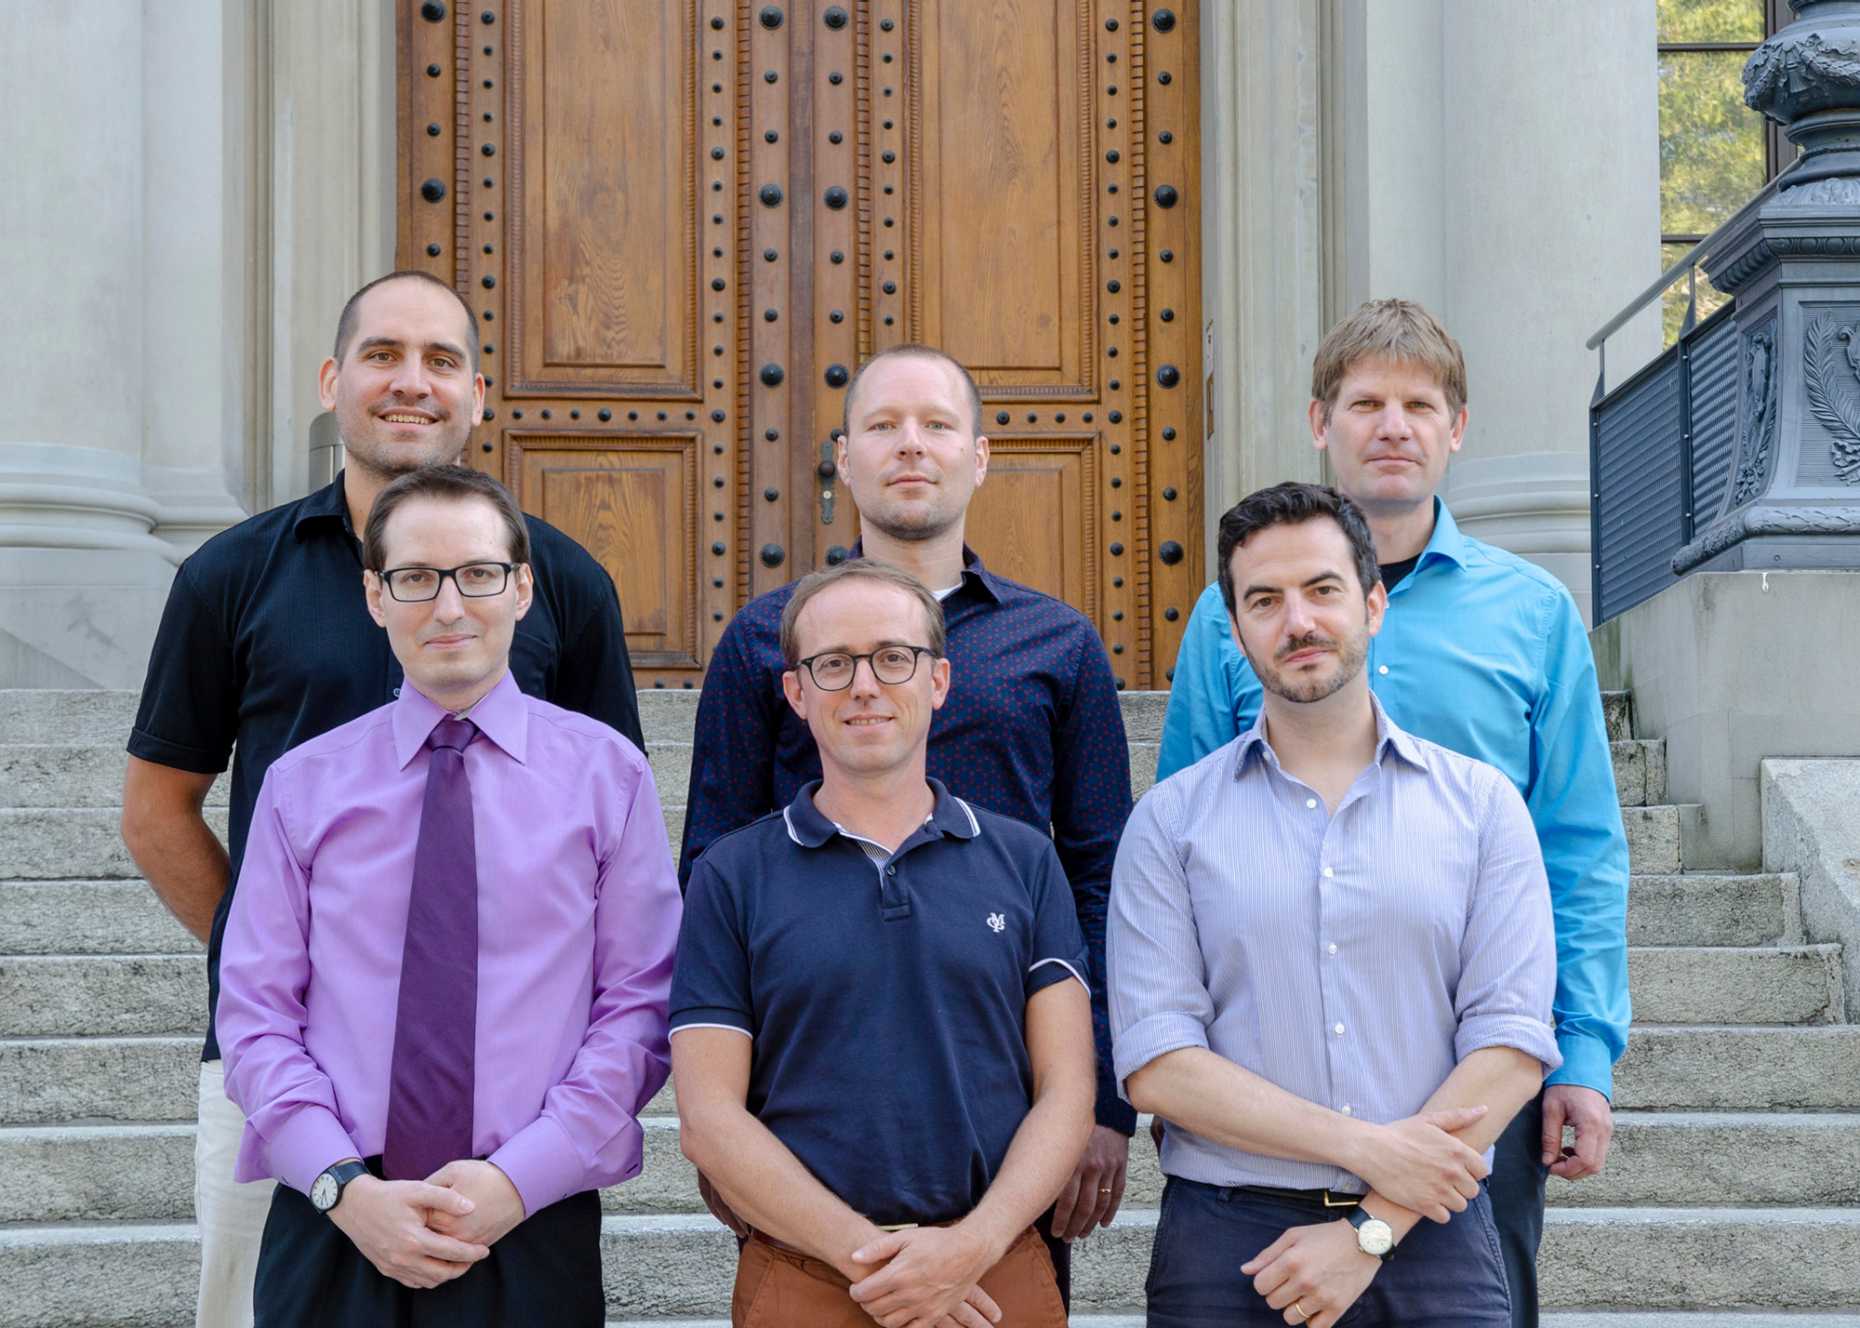 The team responsible for service teaching and more at the Department of Computer Science consist of Hermann Lehner, Malte Schwerhoff, Felix Friedrich (top row), Ghislain Fourny, Lukas Fässler and Dennis Komm (bottom row).